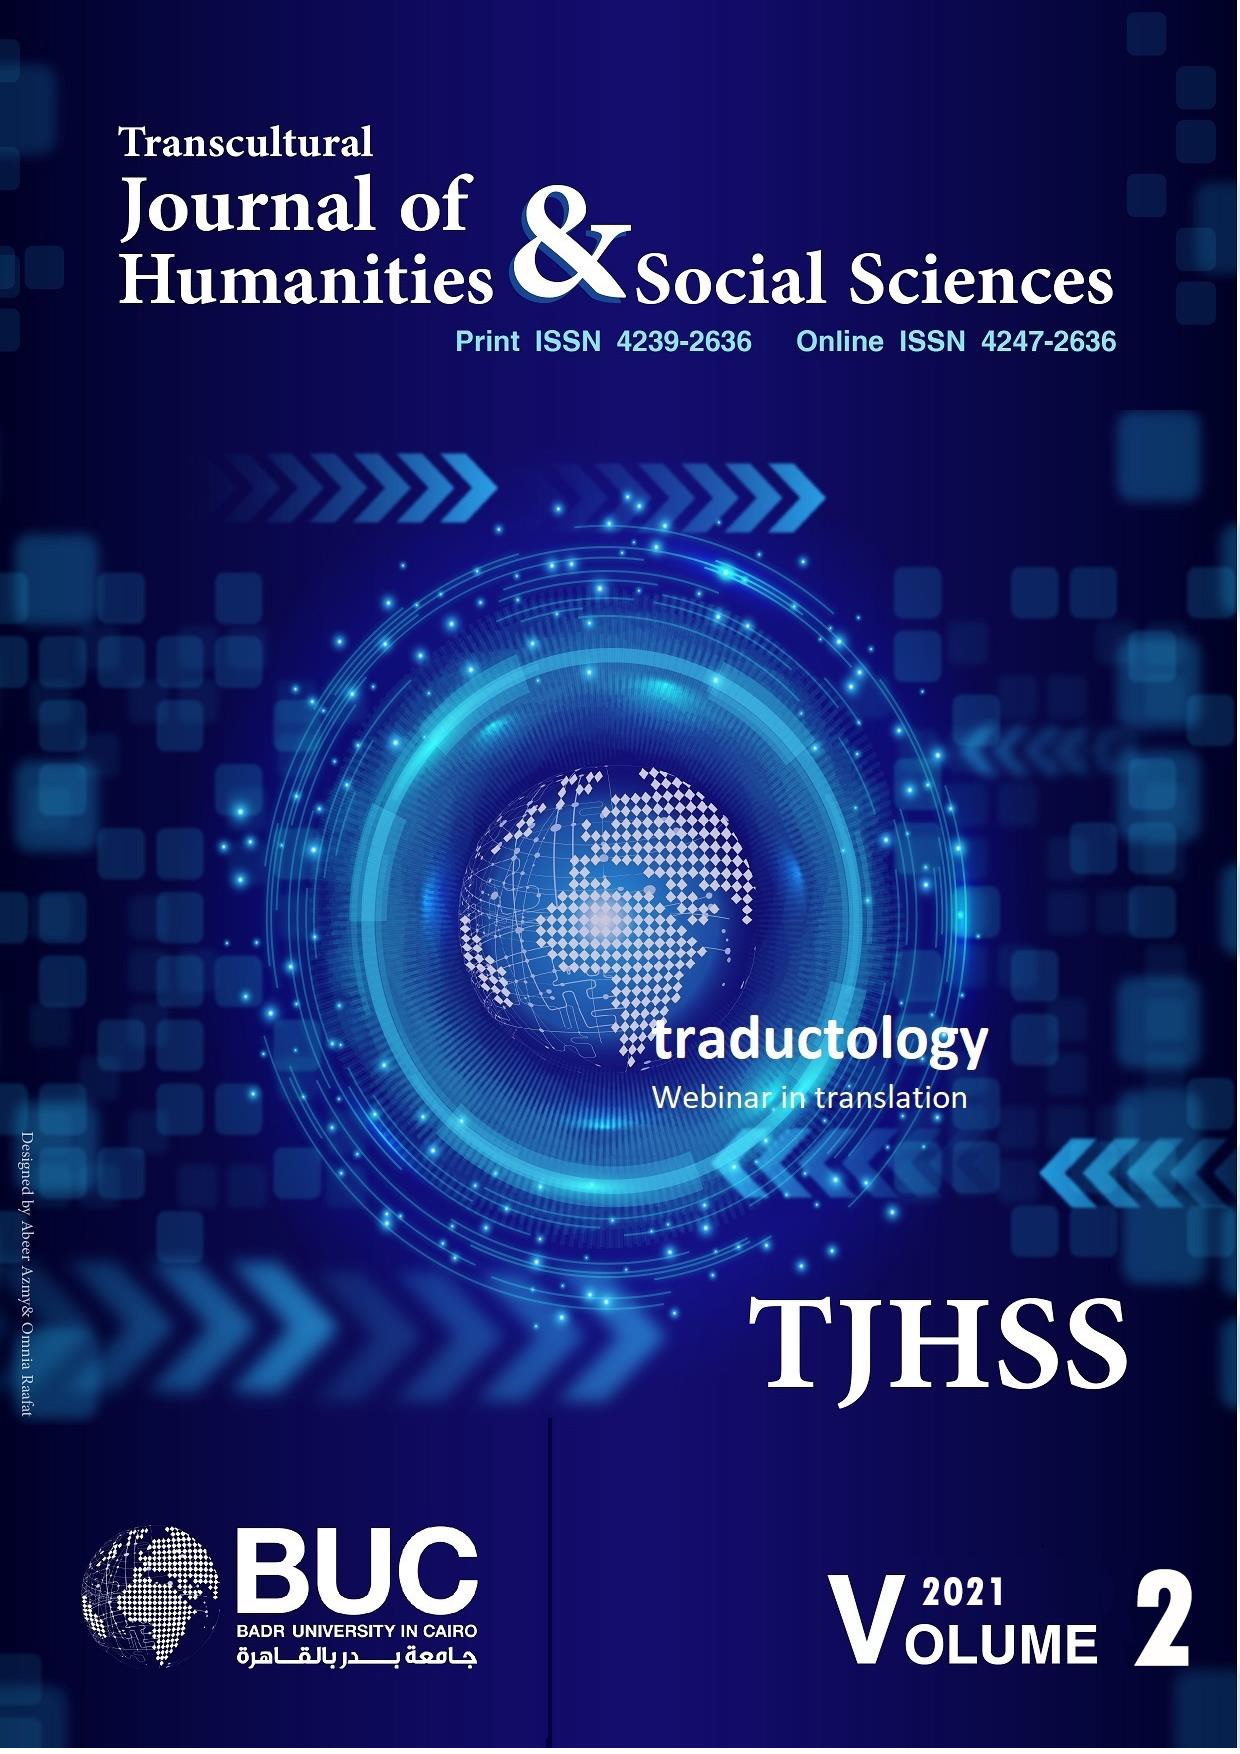 Transcultural Journal of Humanities and Social Sciences